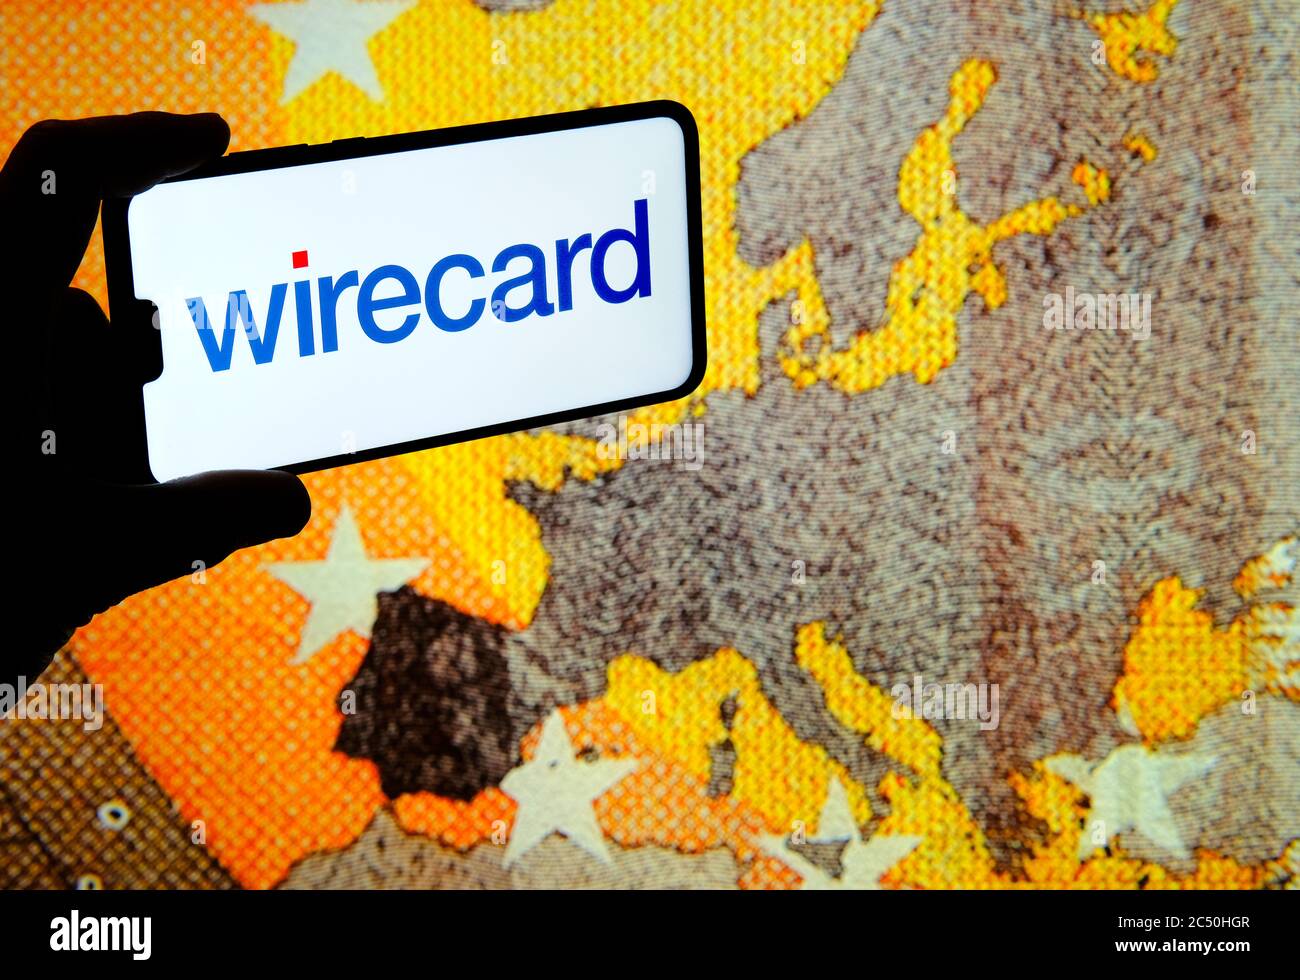 Stone /United Kingdom - June 29 2020: Wirecard logo on smartphone and euro banknote large image on the blurred background screen. Real photo, not a mo Stock Photo